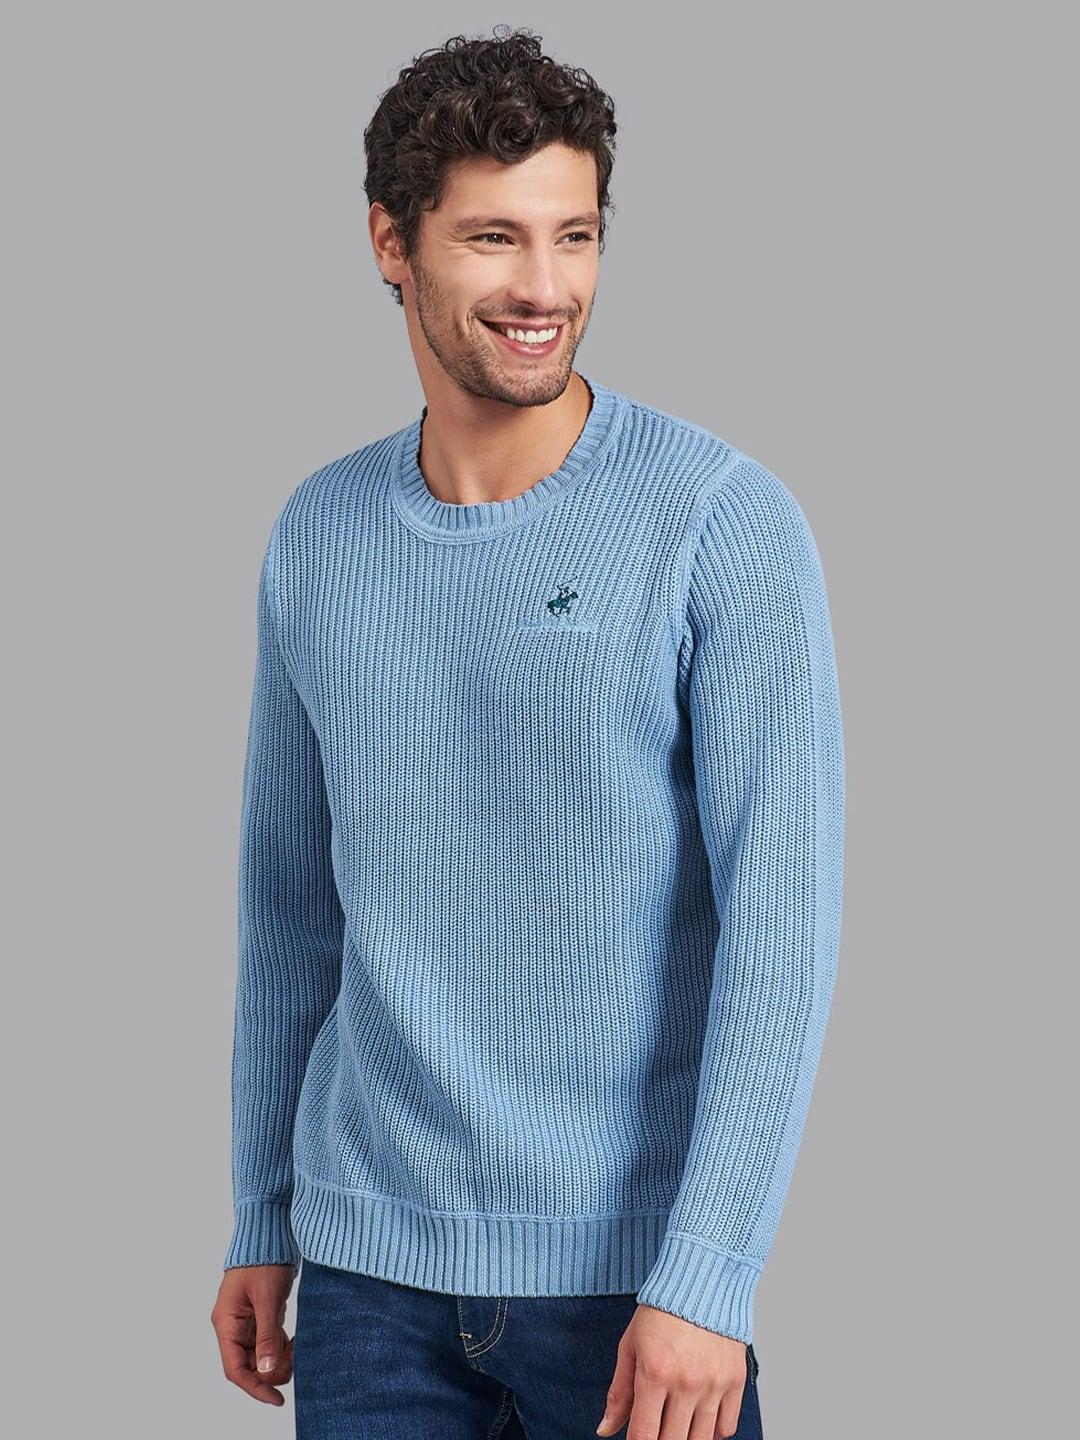 beverly-hills-polo-club-men-blue-ribbed-pullover